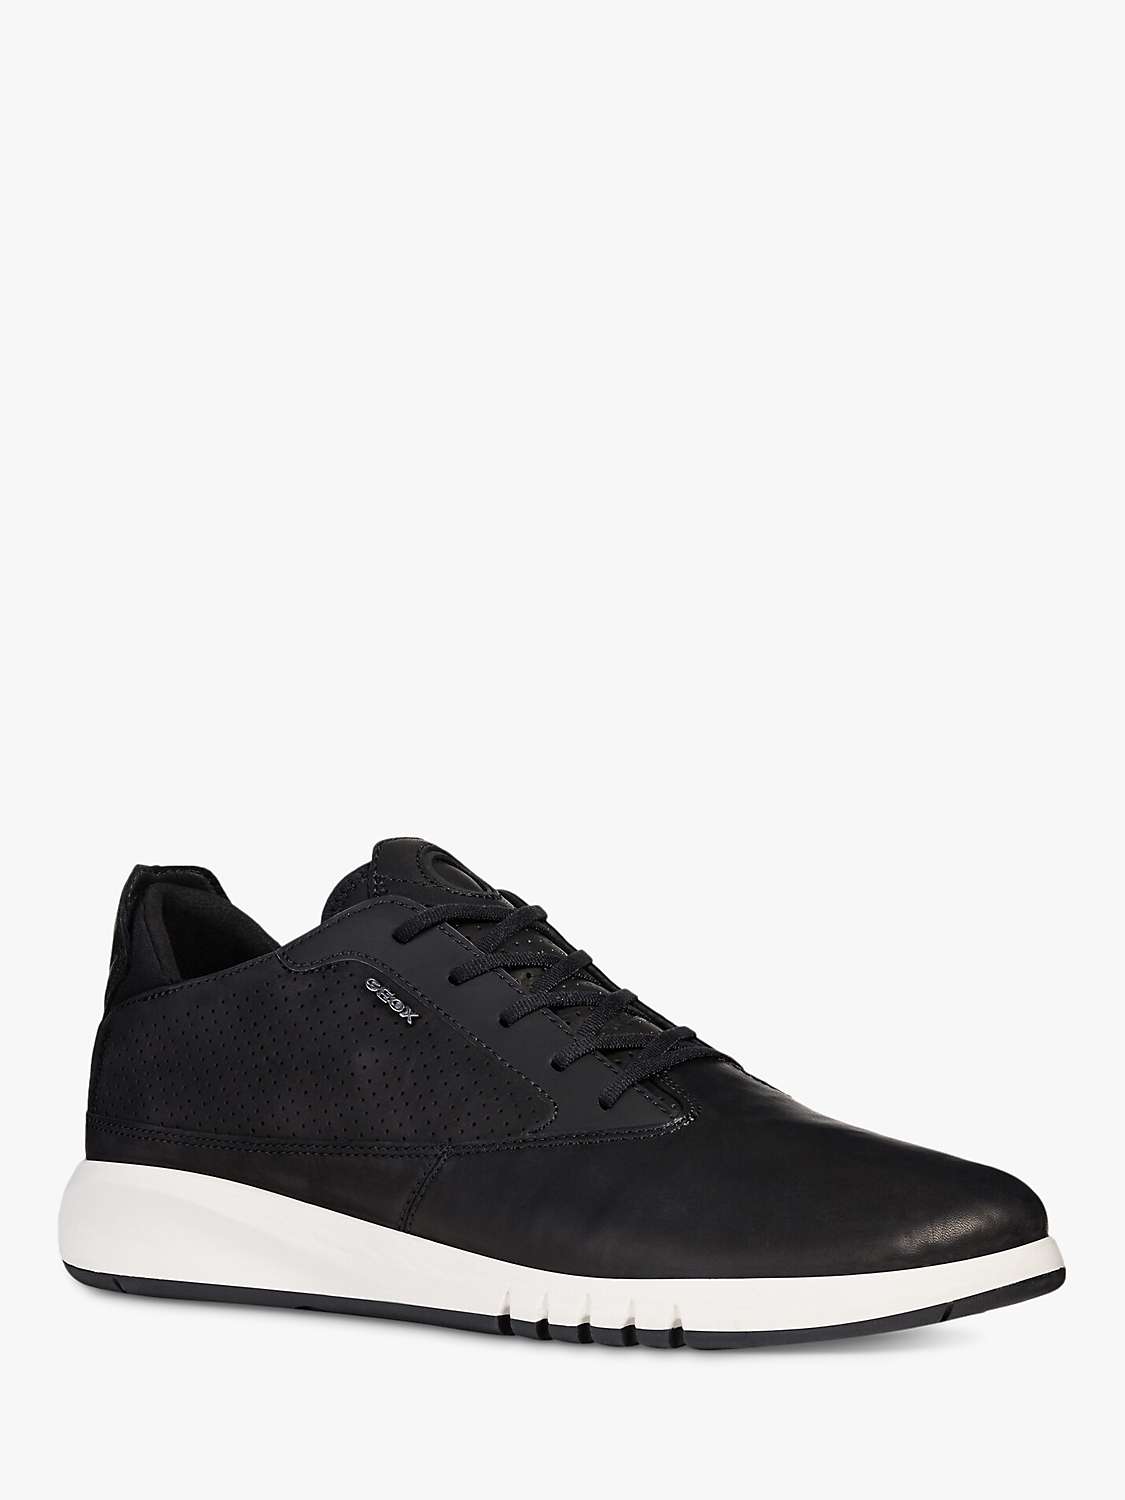 Buy Geox Aerantis Leather Trainers Online at johnlewis.com